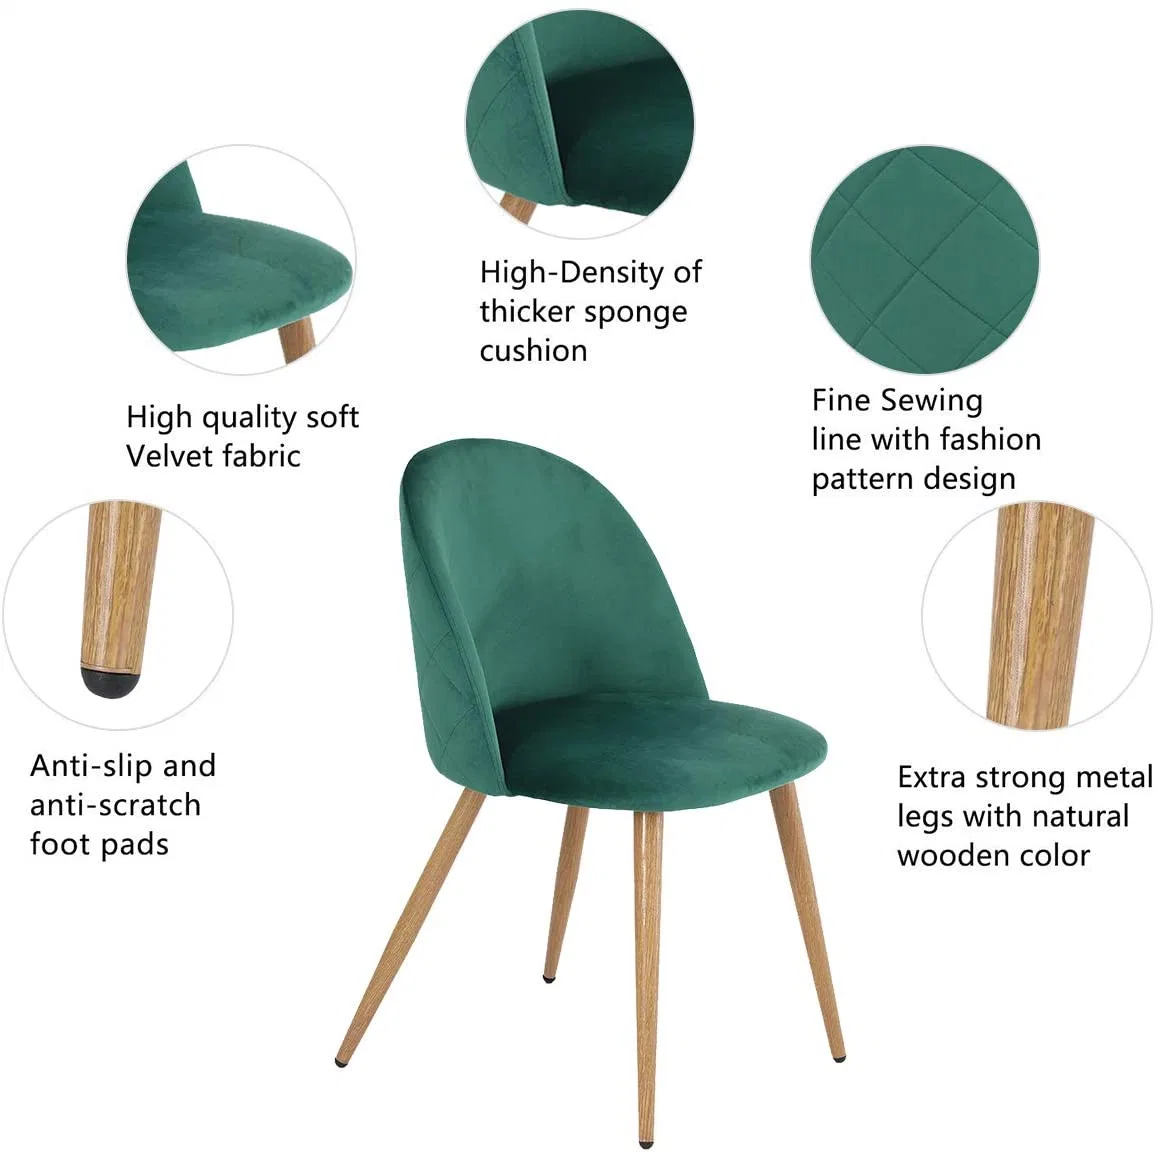 Make-up Chairs Velvet Soft Cushions Seat and Back with Metal Legs Kitchen Chairs for Dining and Living Room Chair